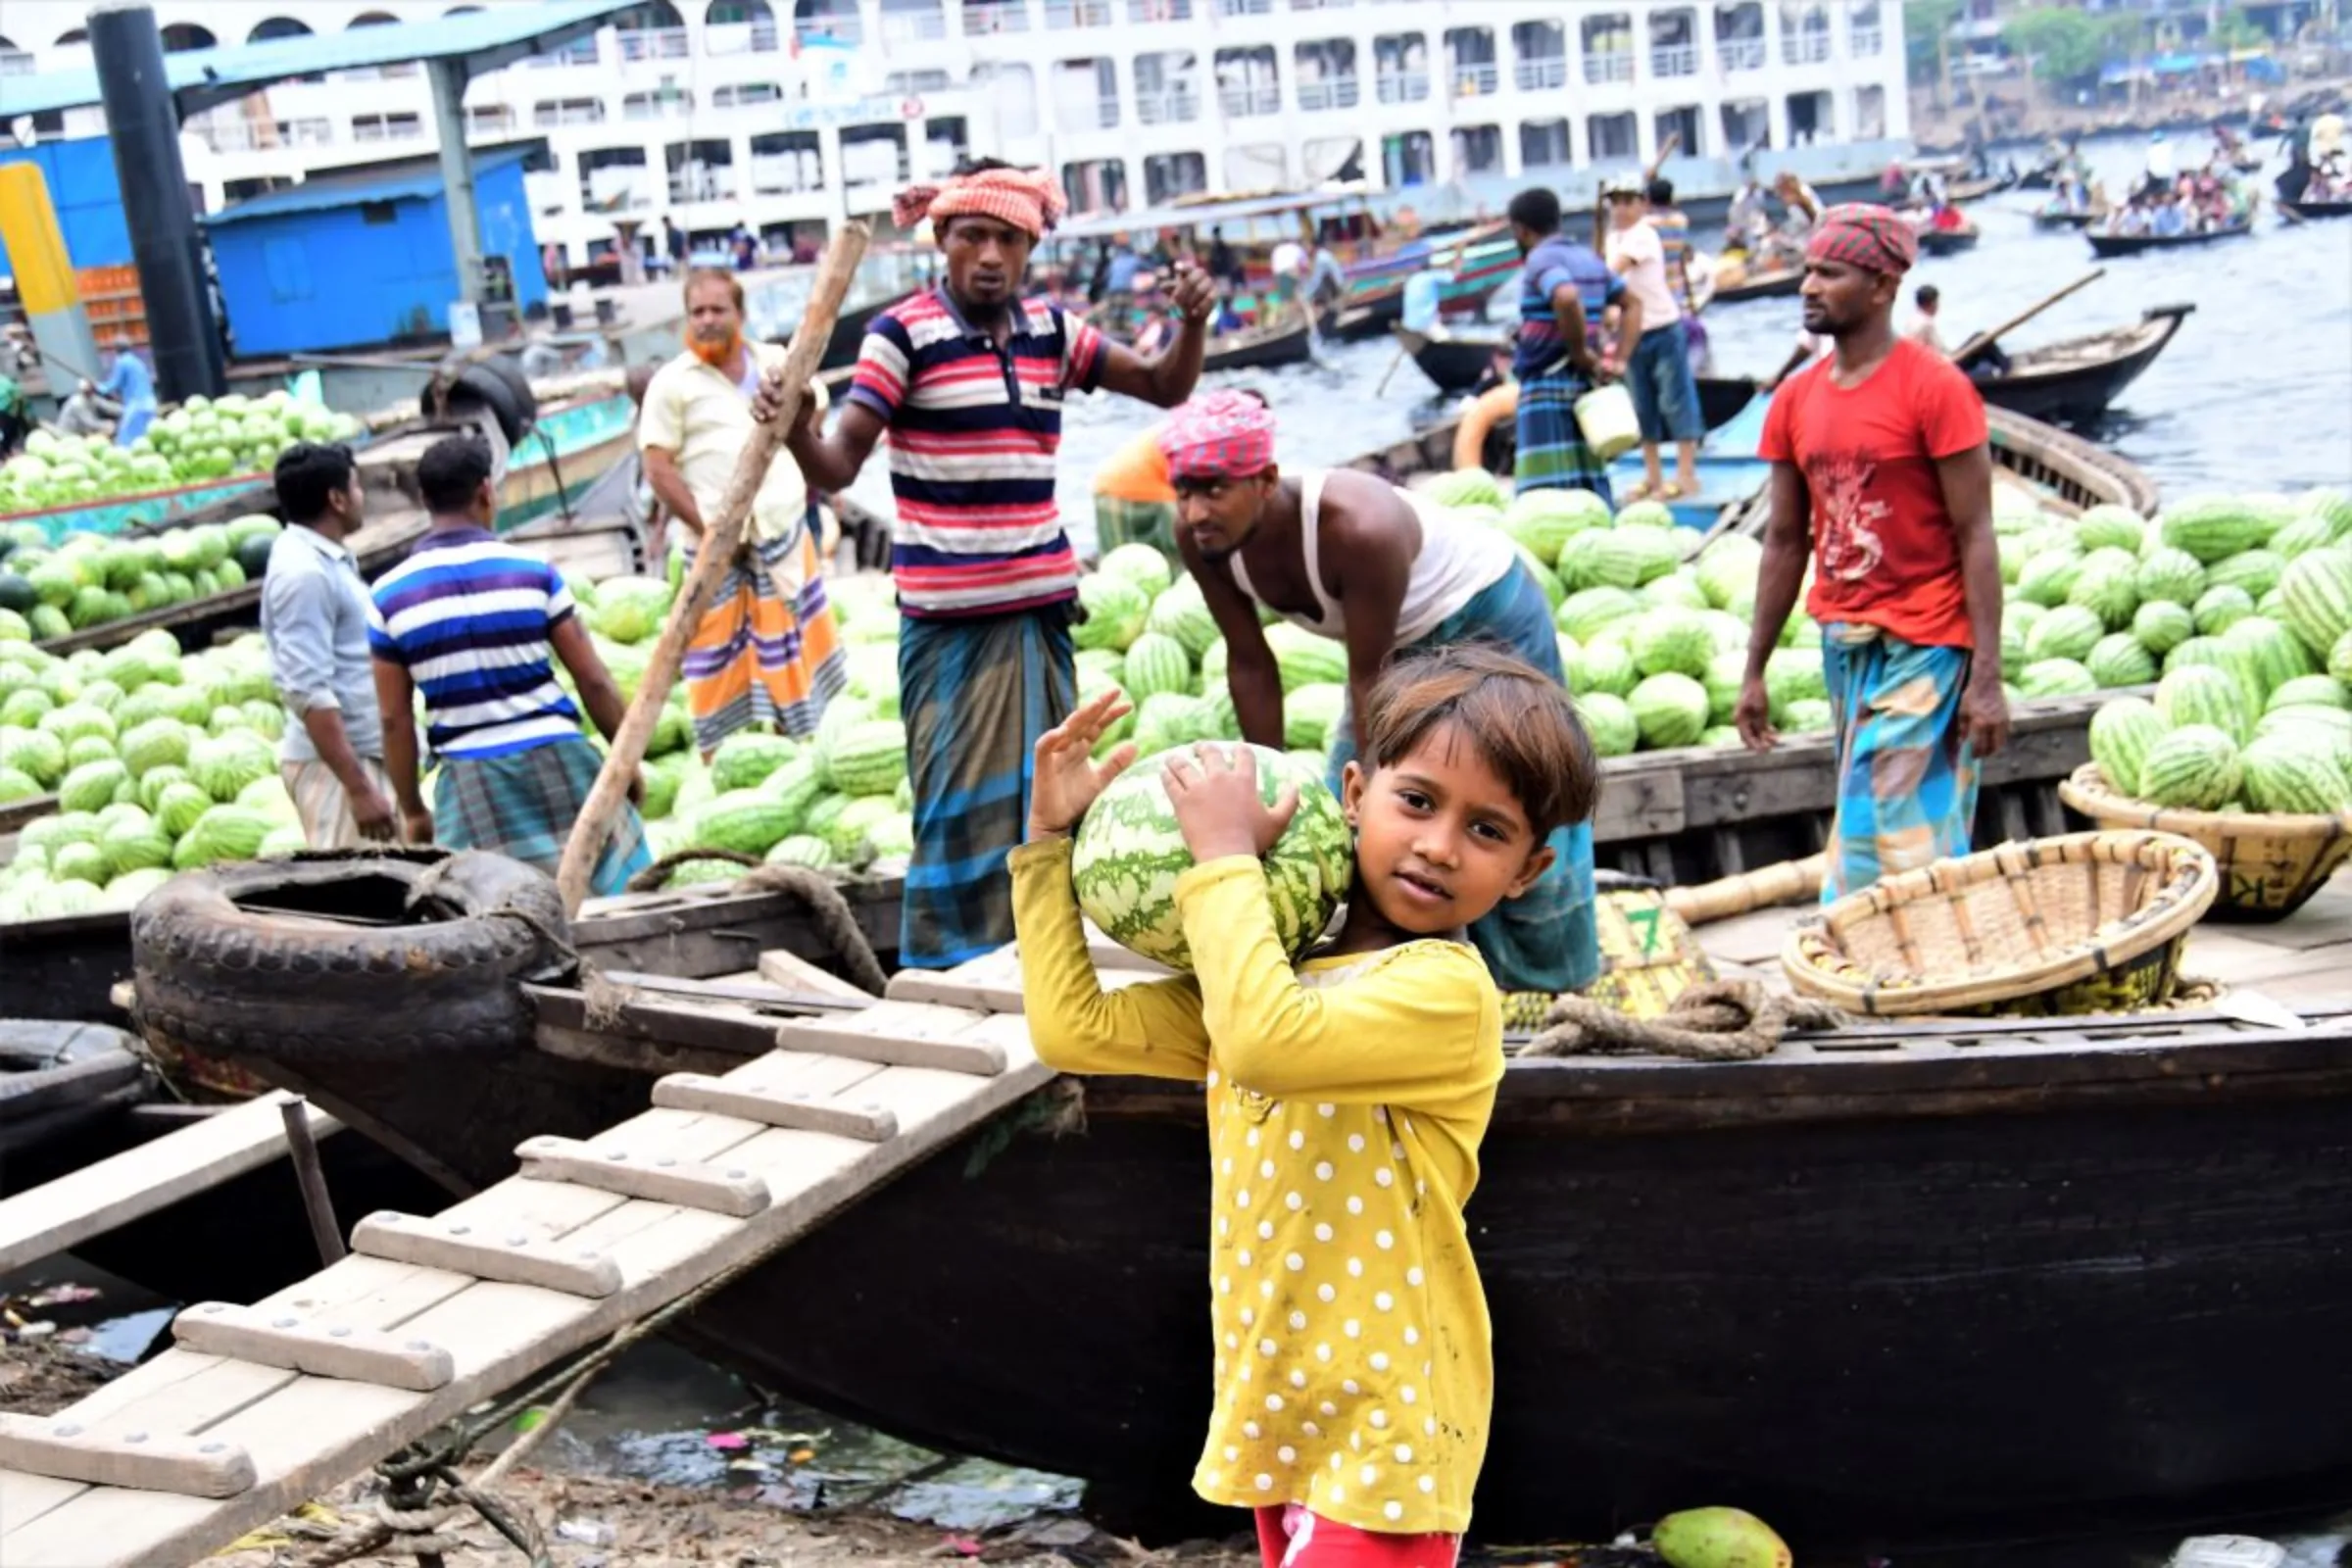 Rupa, 9, who migrated to an urban slum last year after a cyclone destroyed her rural home, unloads watermelons at Sadarghat, a wharf near Dhaka, Bangladesh, March 22, 2022. Thomson Reuters Foundation/Mosabber Hossain